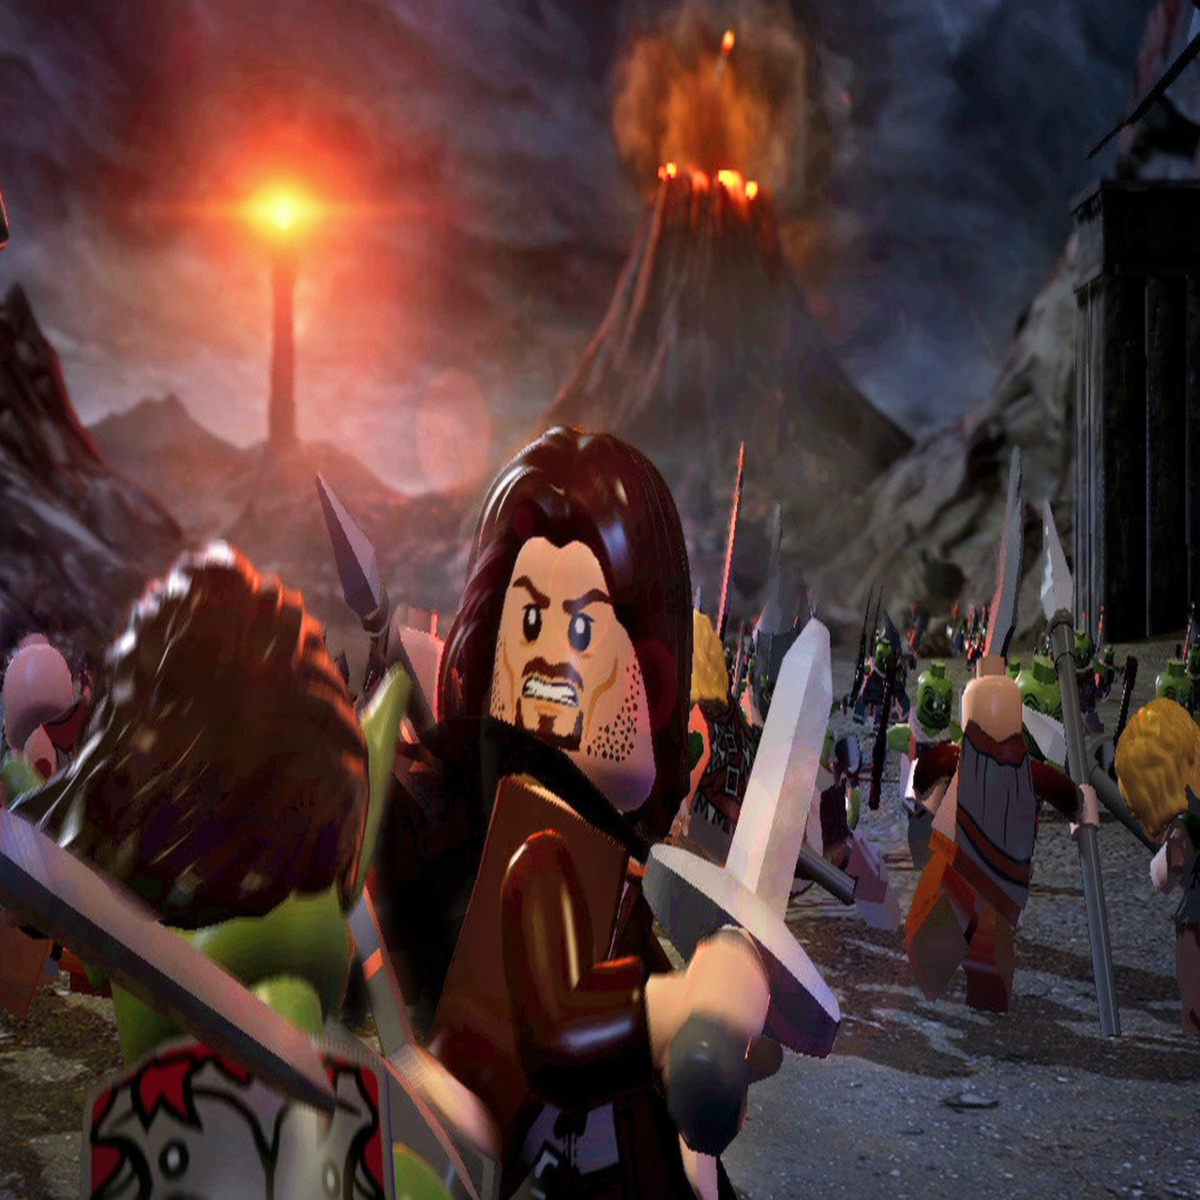 LEGO Middle-Earth: Yes. All of It.